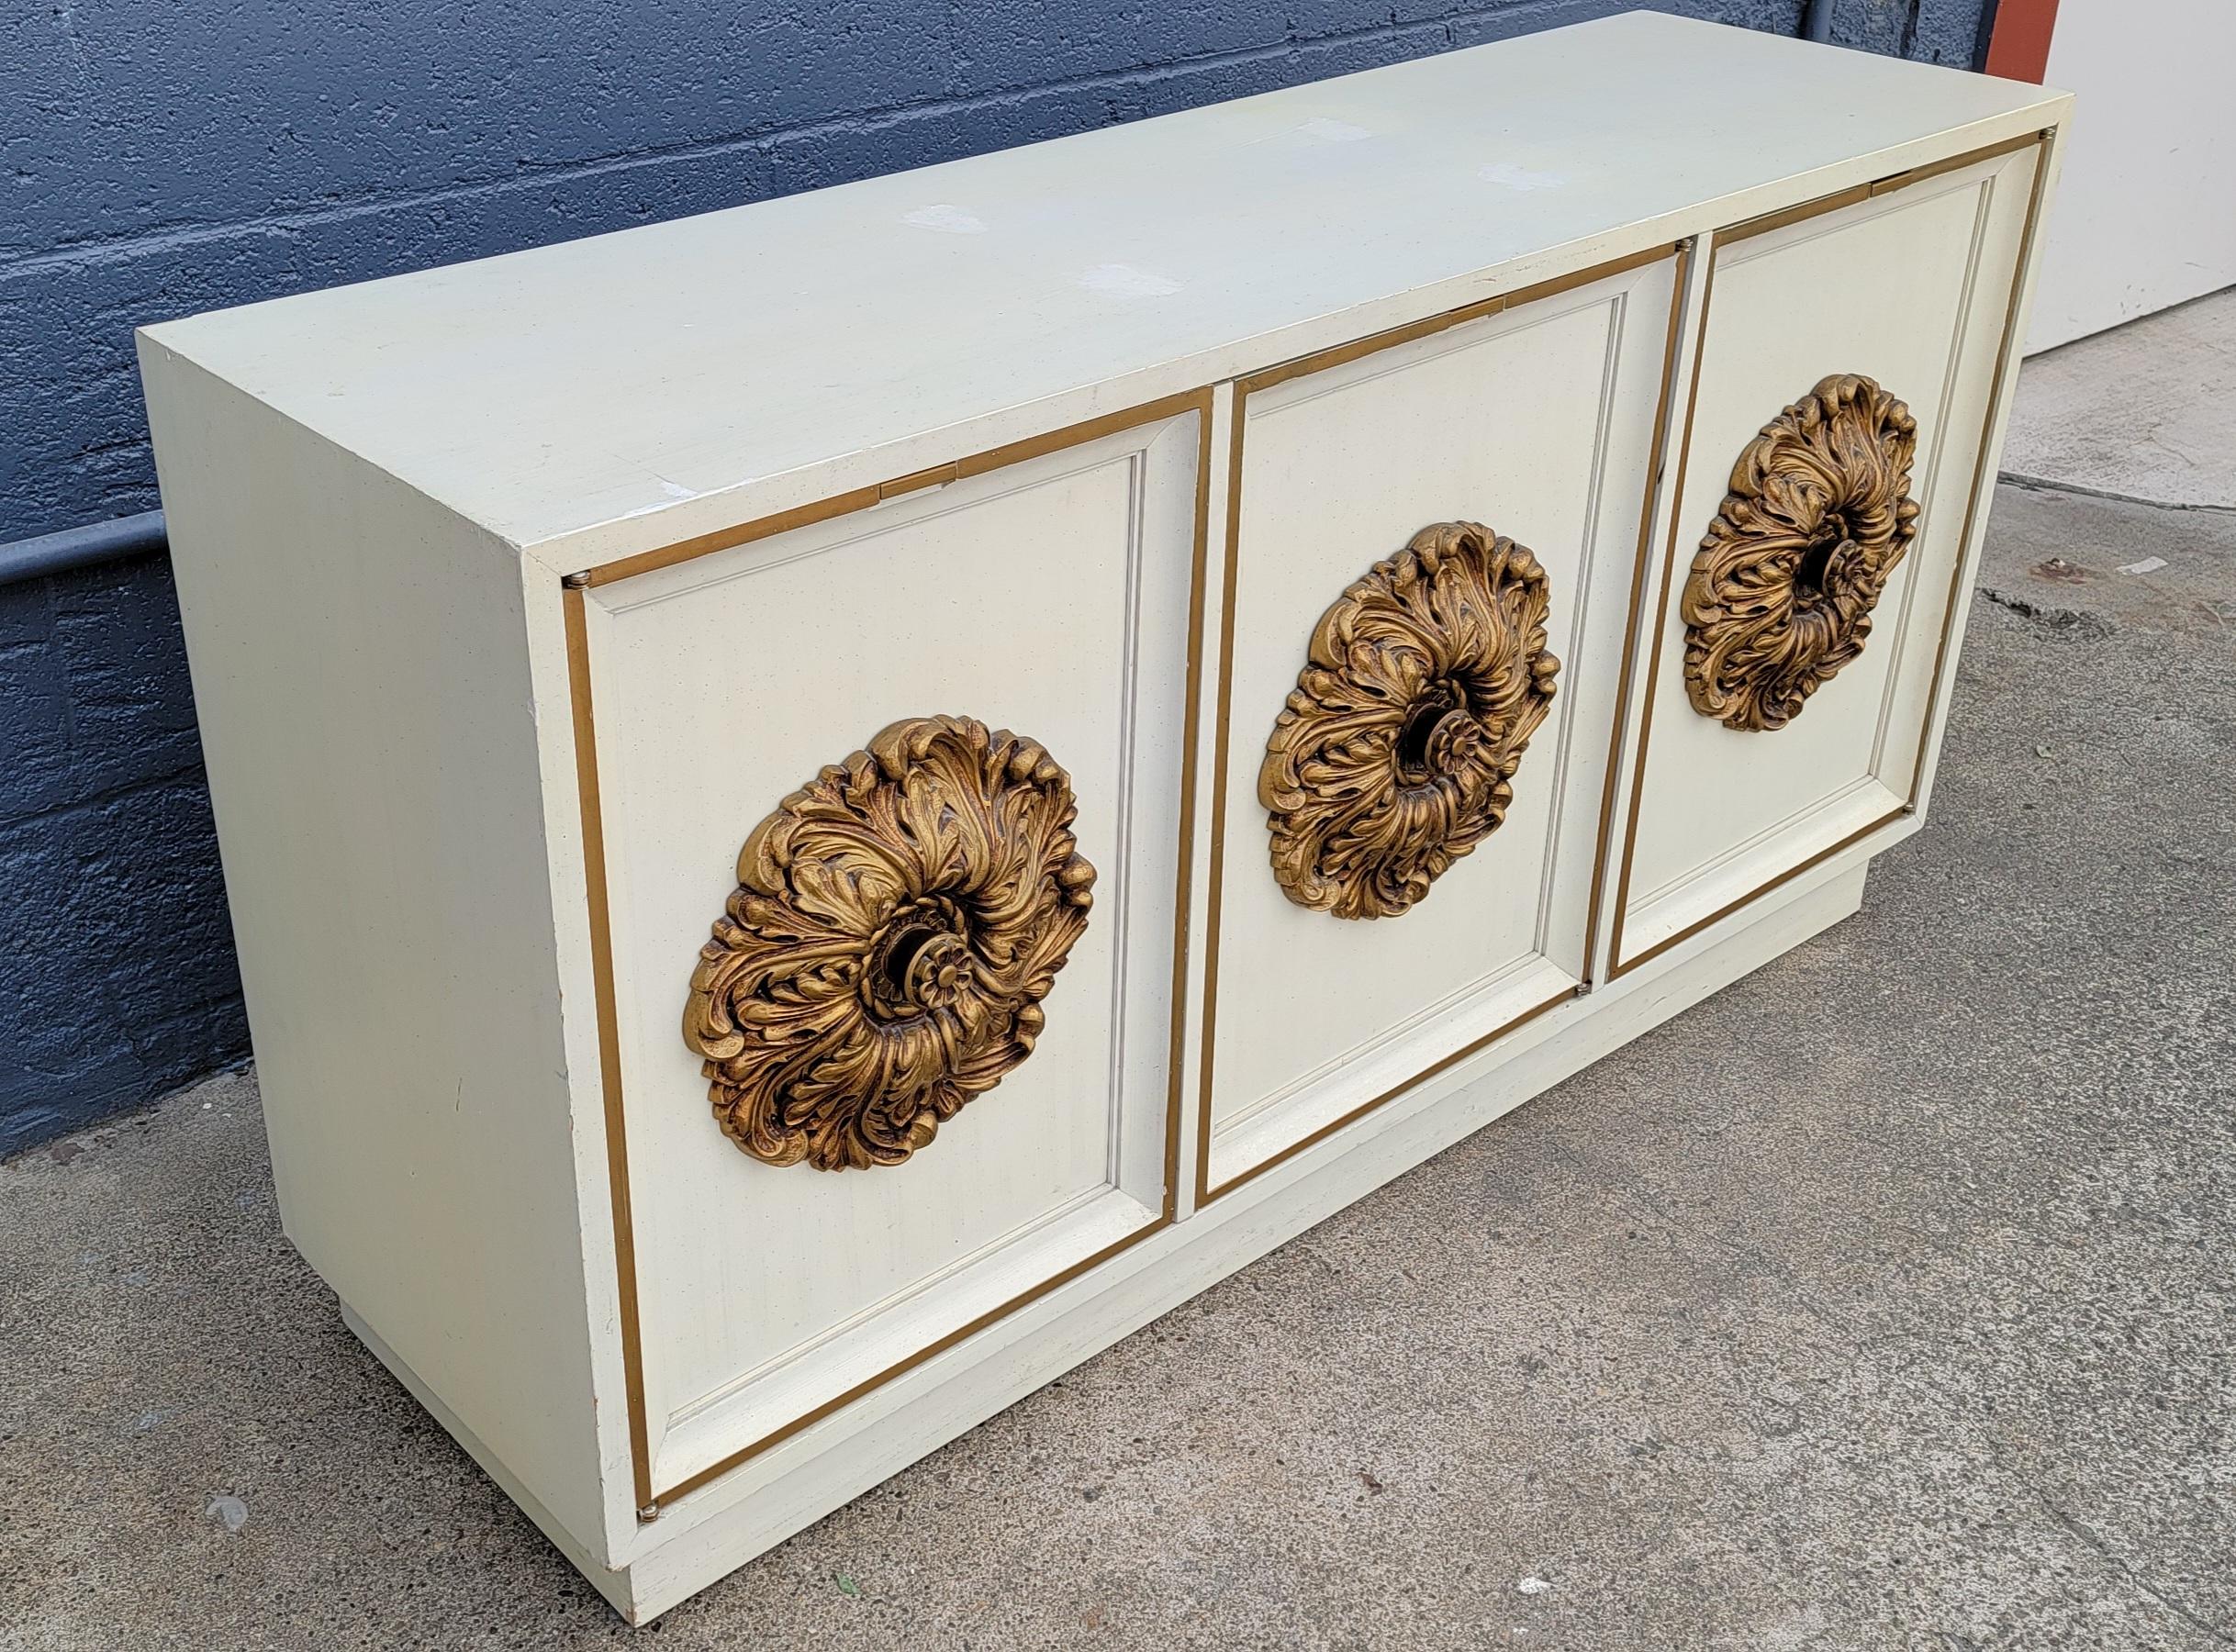 20th Century Lane Furniture Credenza in the manner of James Mont